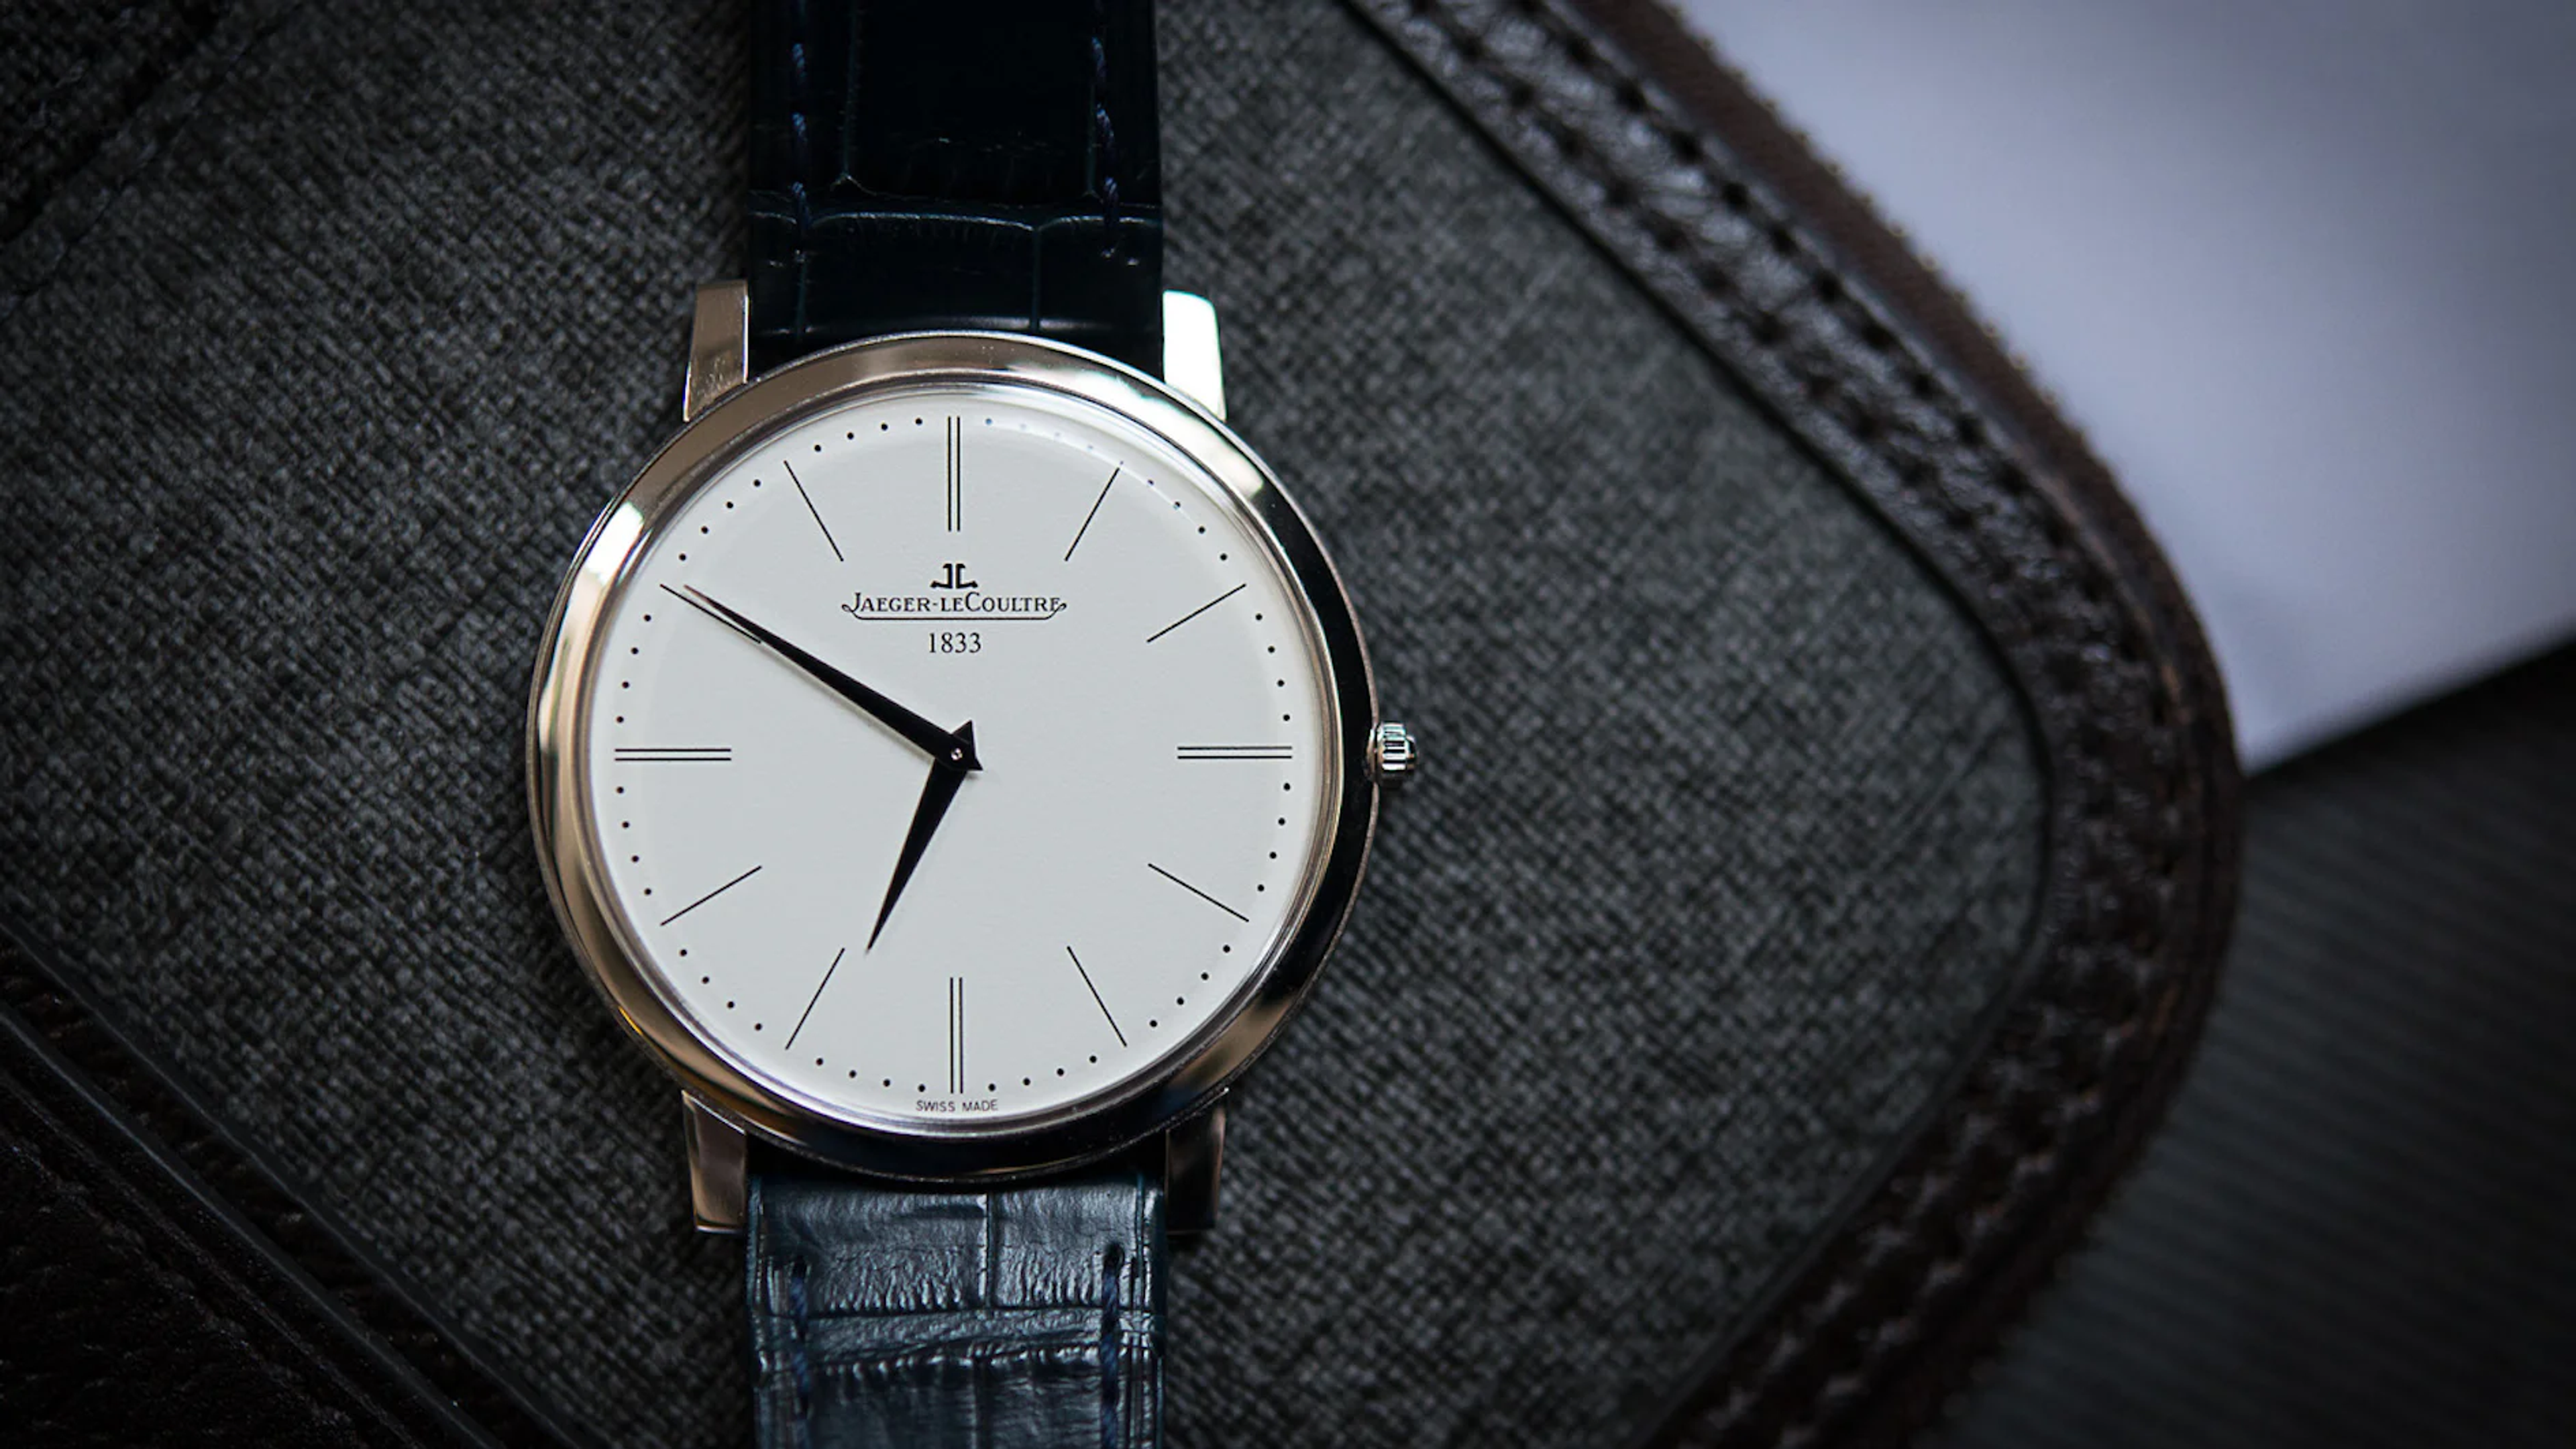 Thoughts On The Jaeger-LeCoultre Master Ultra-Thin Jubilee (The Thinnest Mechanical Watch In The World)